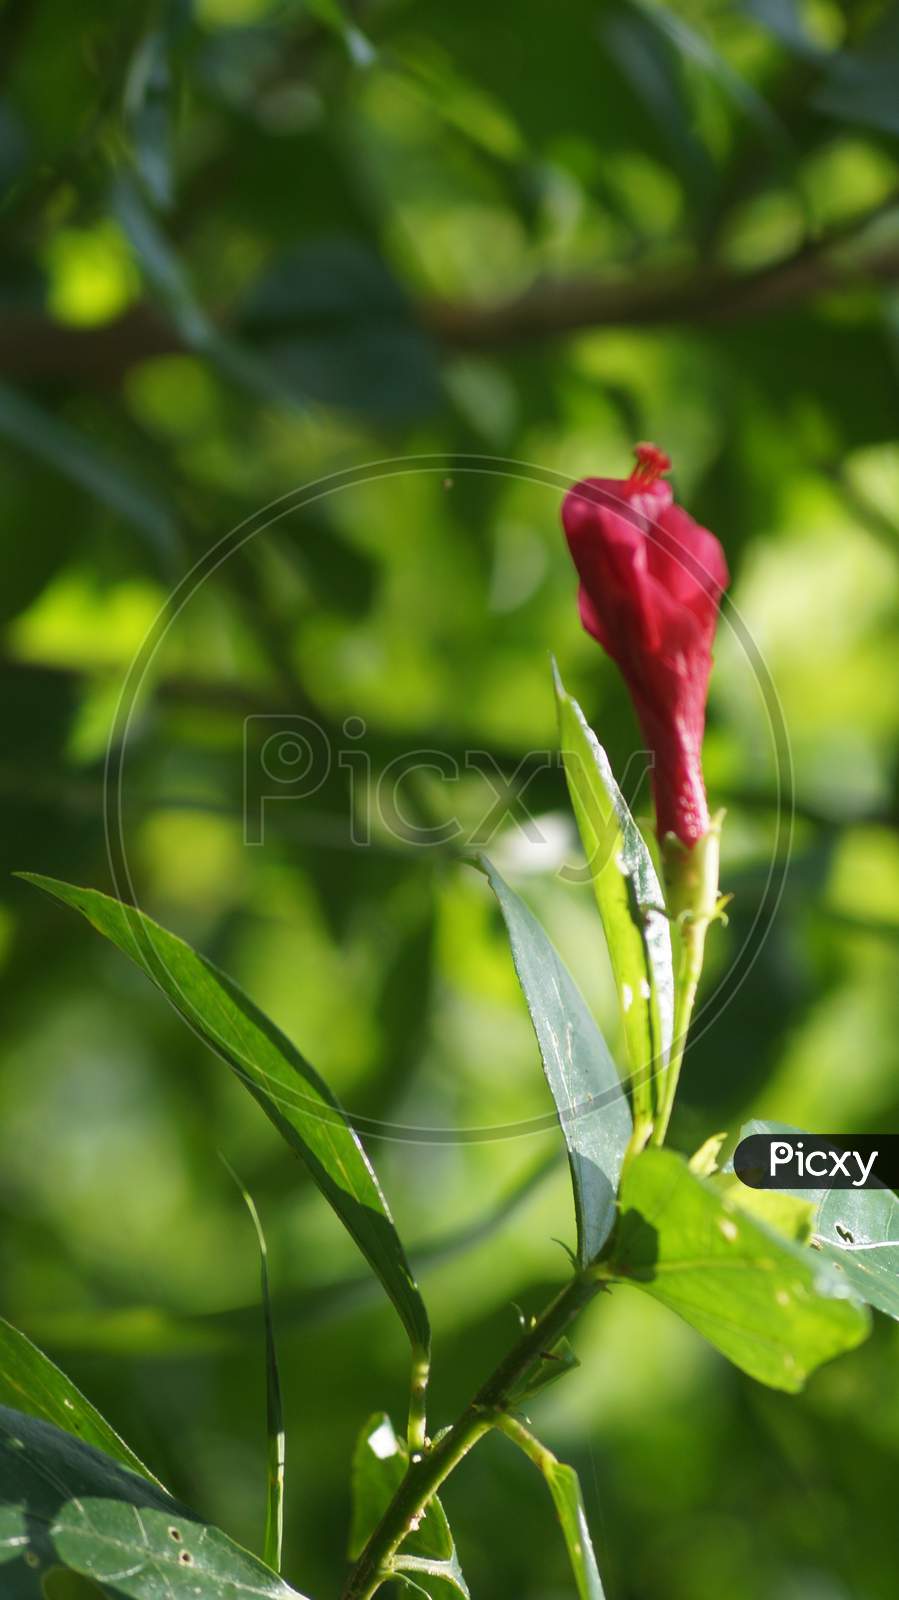 Photograph of a red colored flower is taken on top of its leaf.